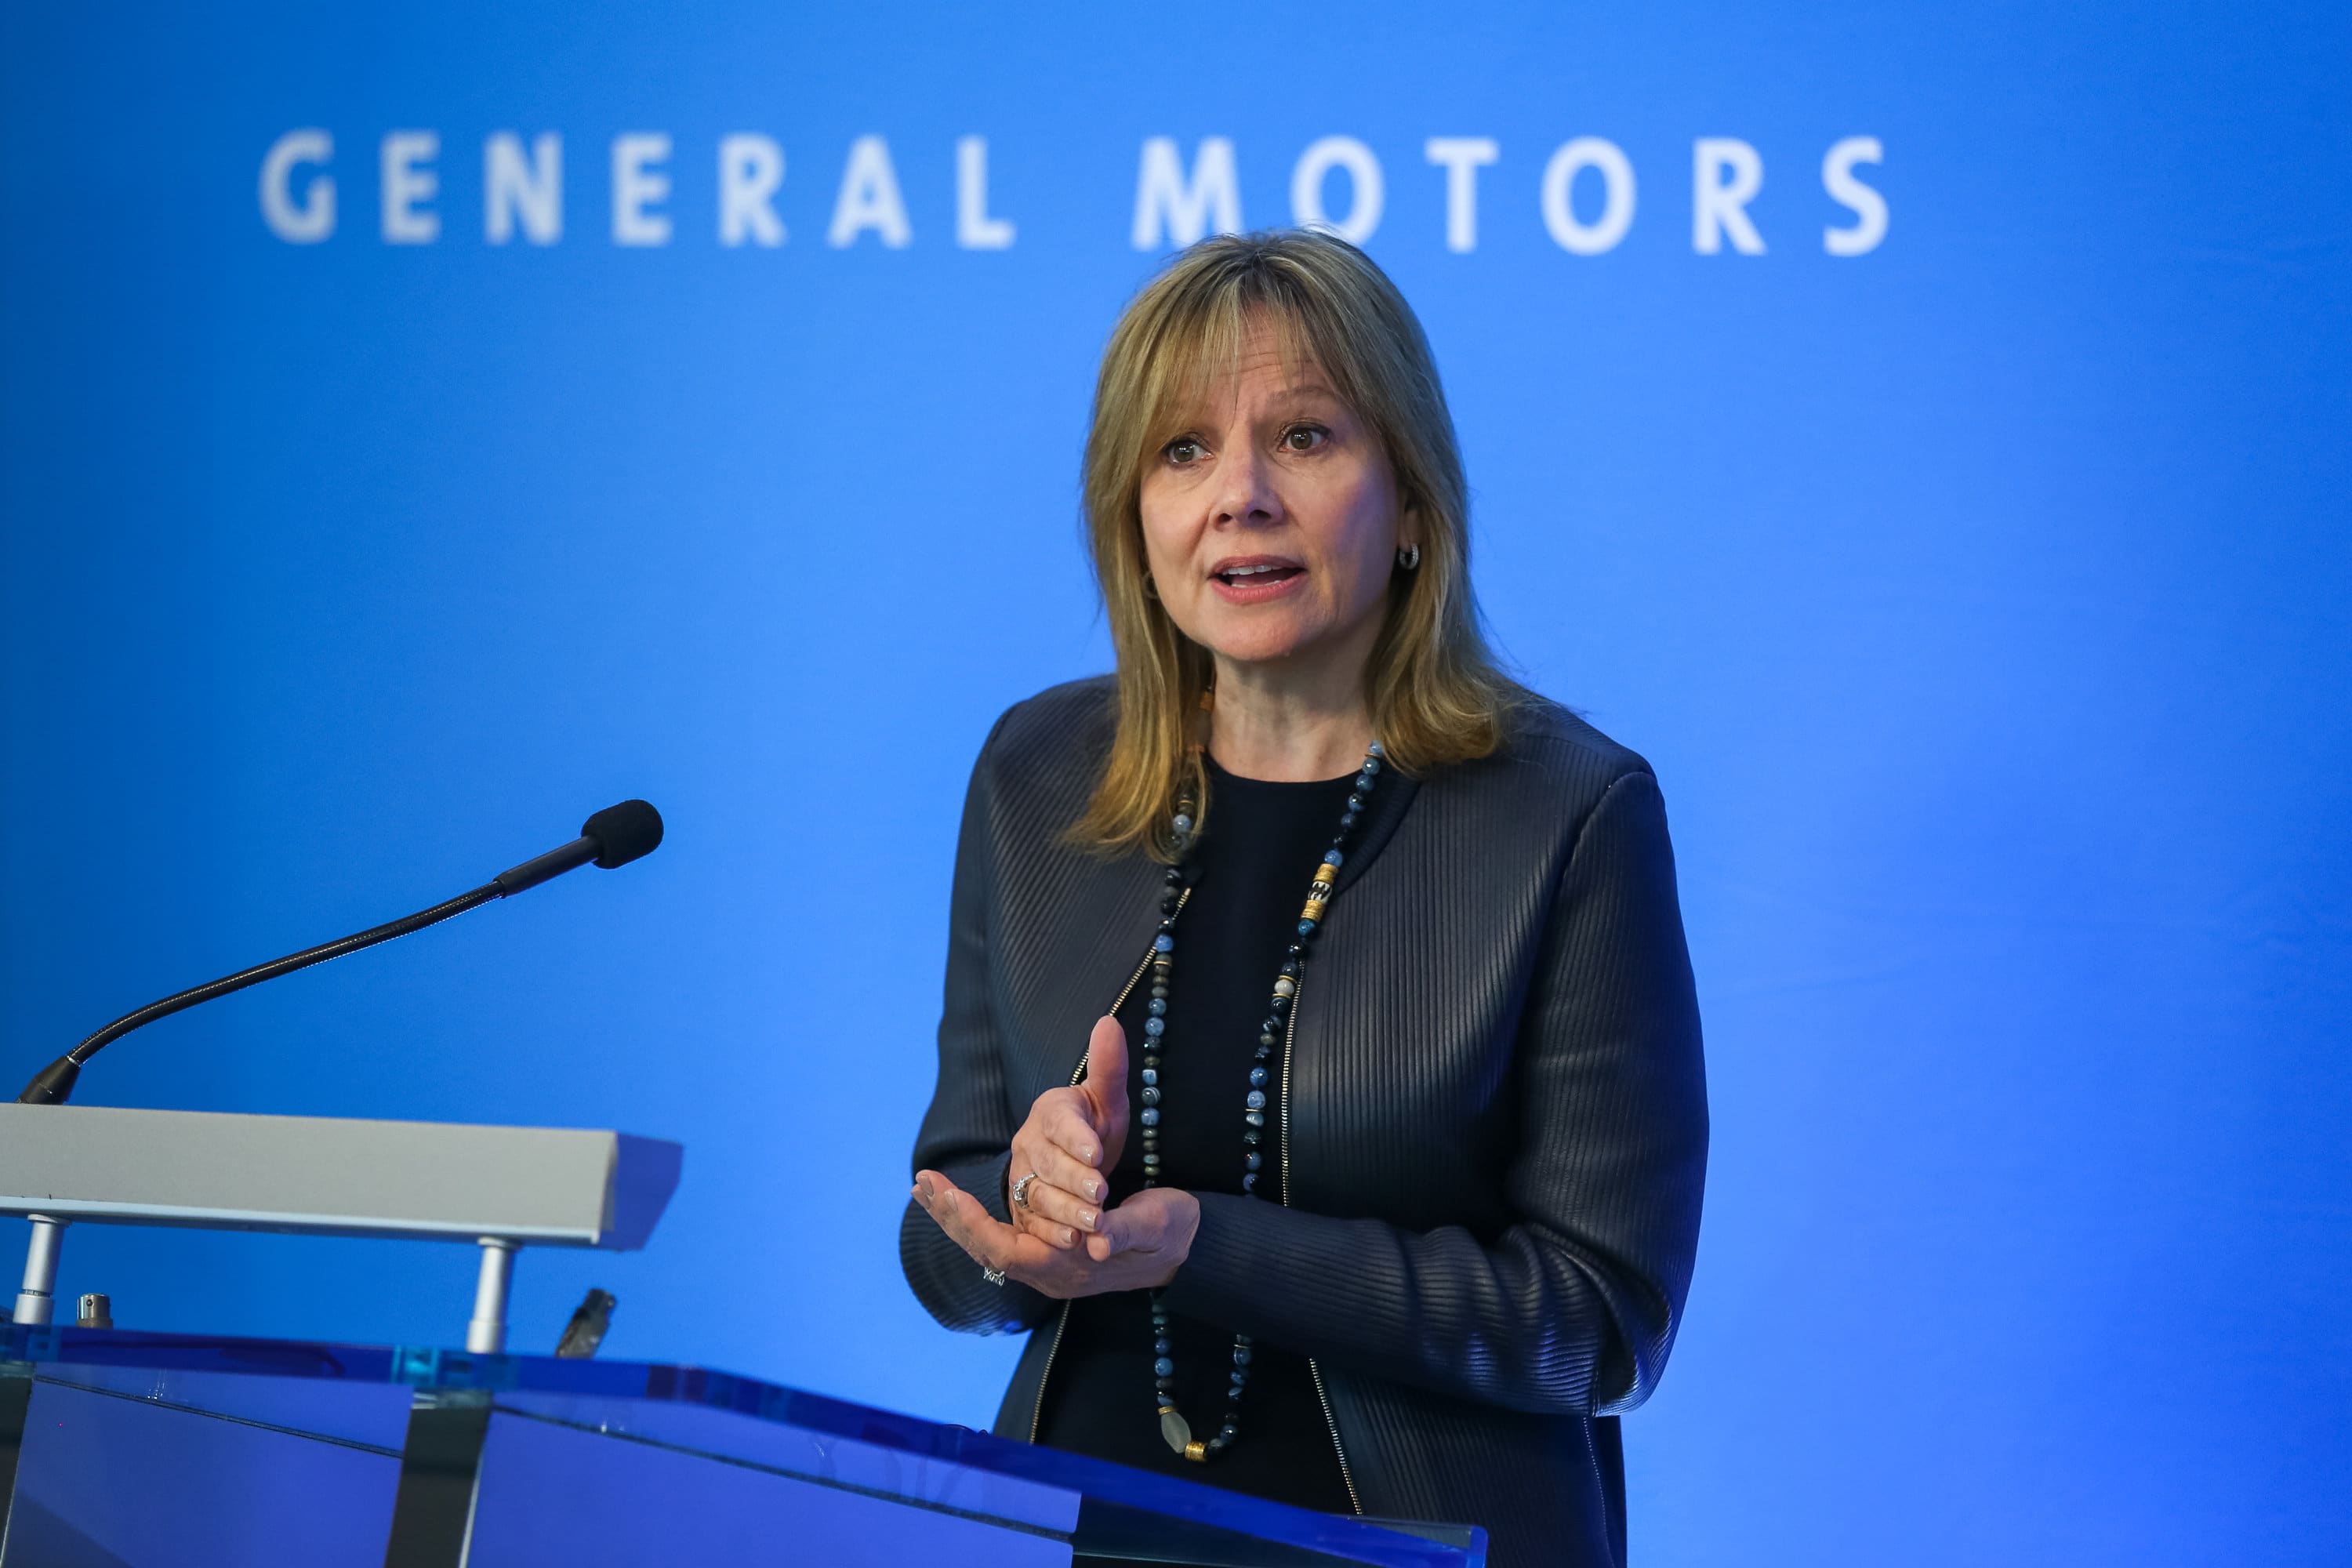 GM is poised for growth as automaker targets trillions in new markets